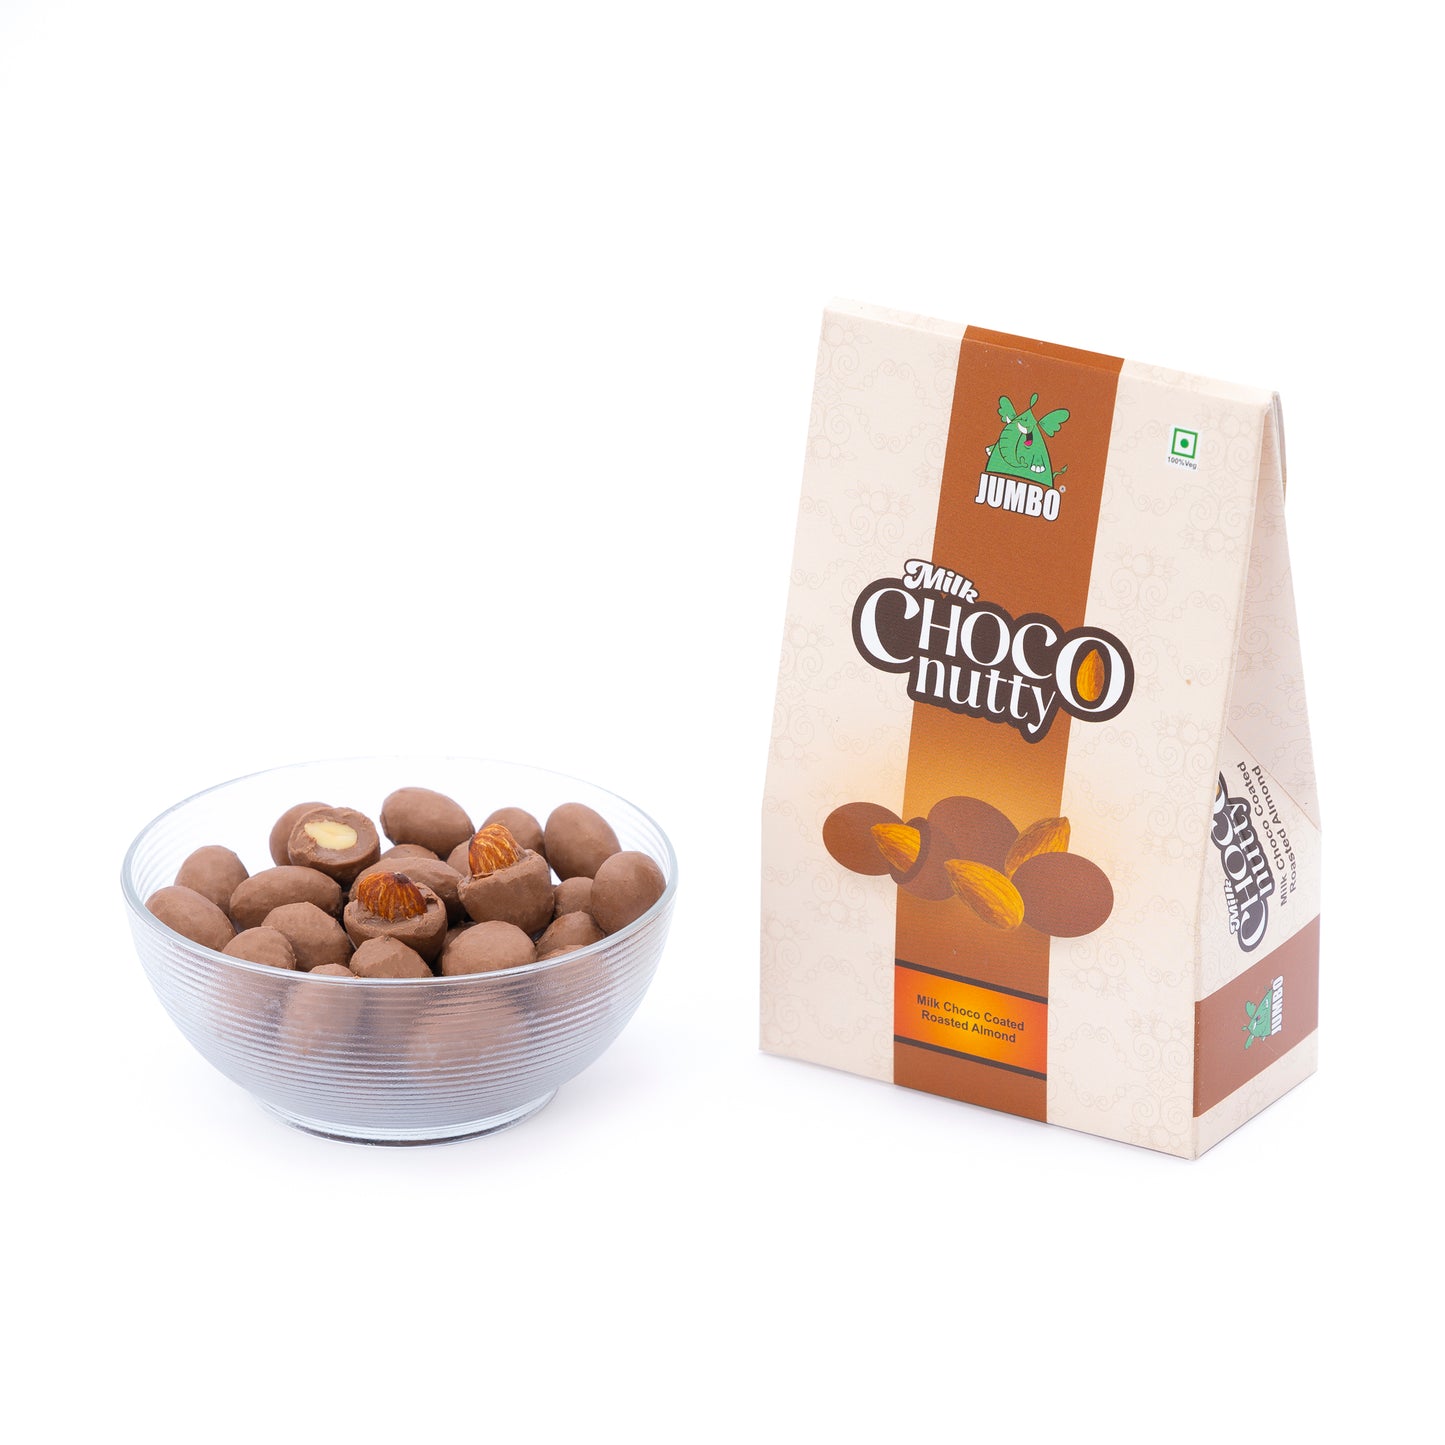 JUMBO Milk Choco Nutty, Milk Chocolate Covered Nutty Roasted Almonds, 100gms Treat Pack